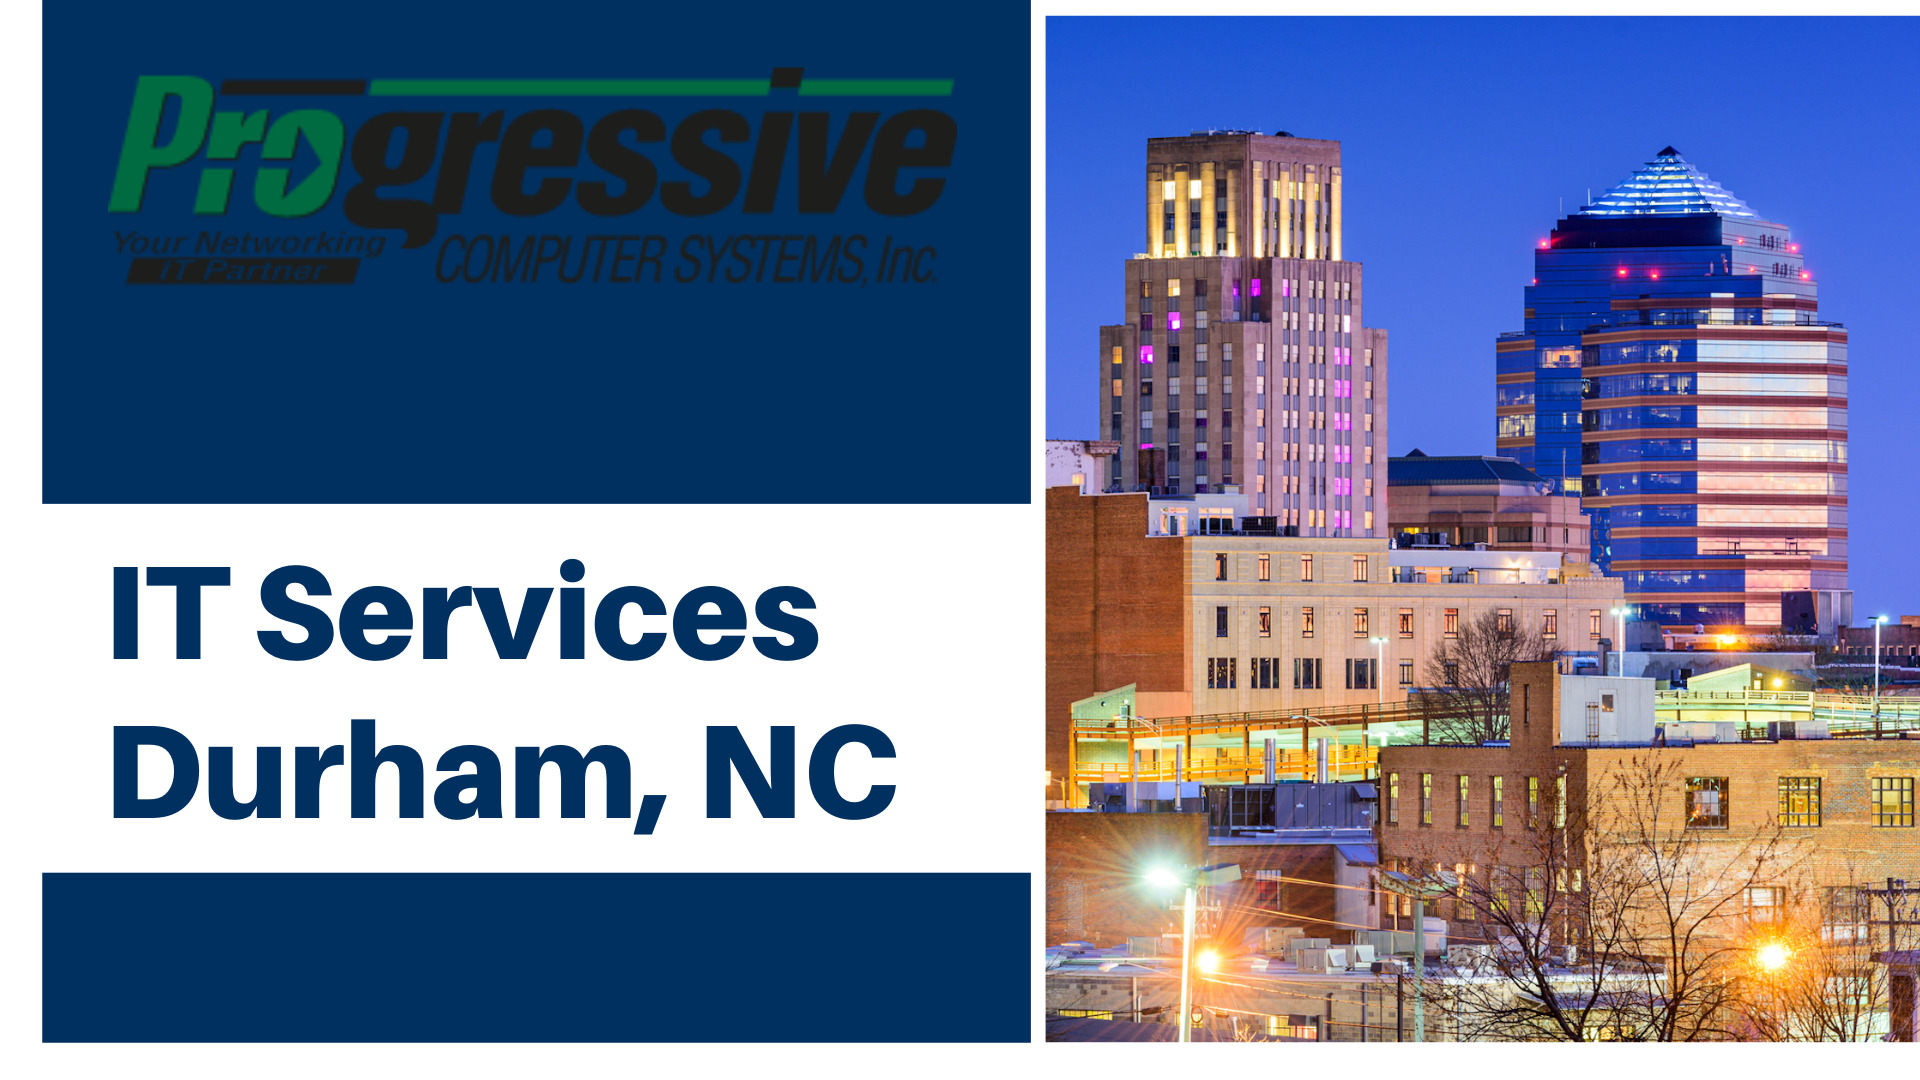 IT Services in Durham, NC